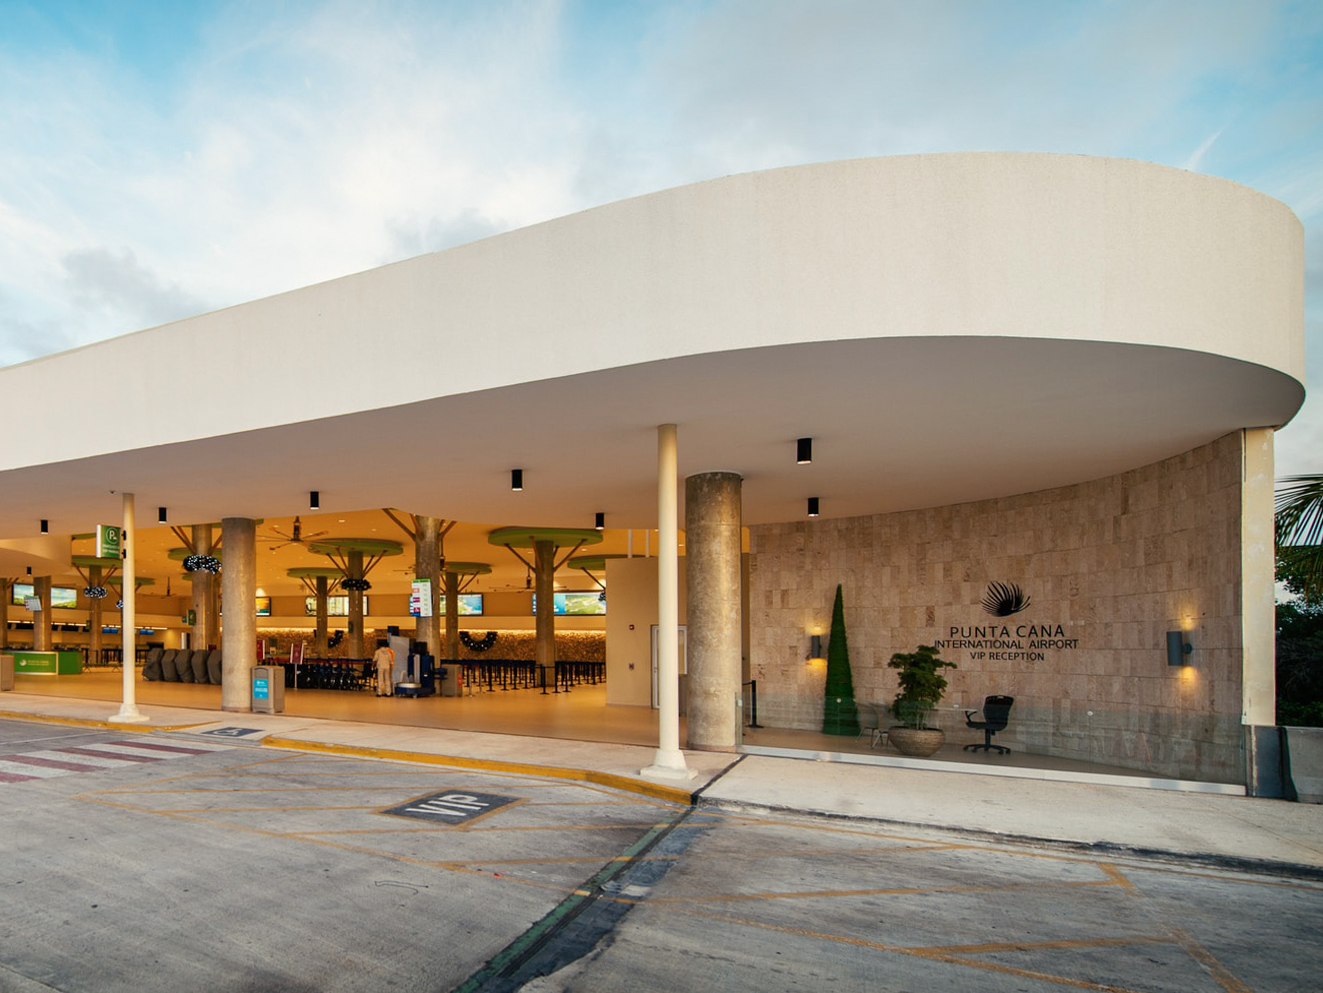 Punta Cana International Airport selects Leidos as its technology provider